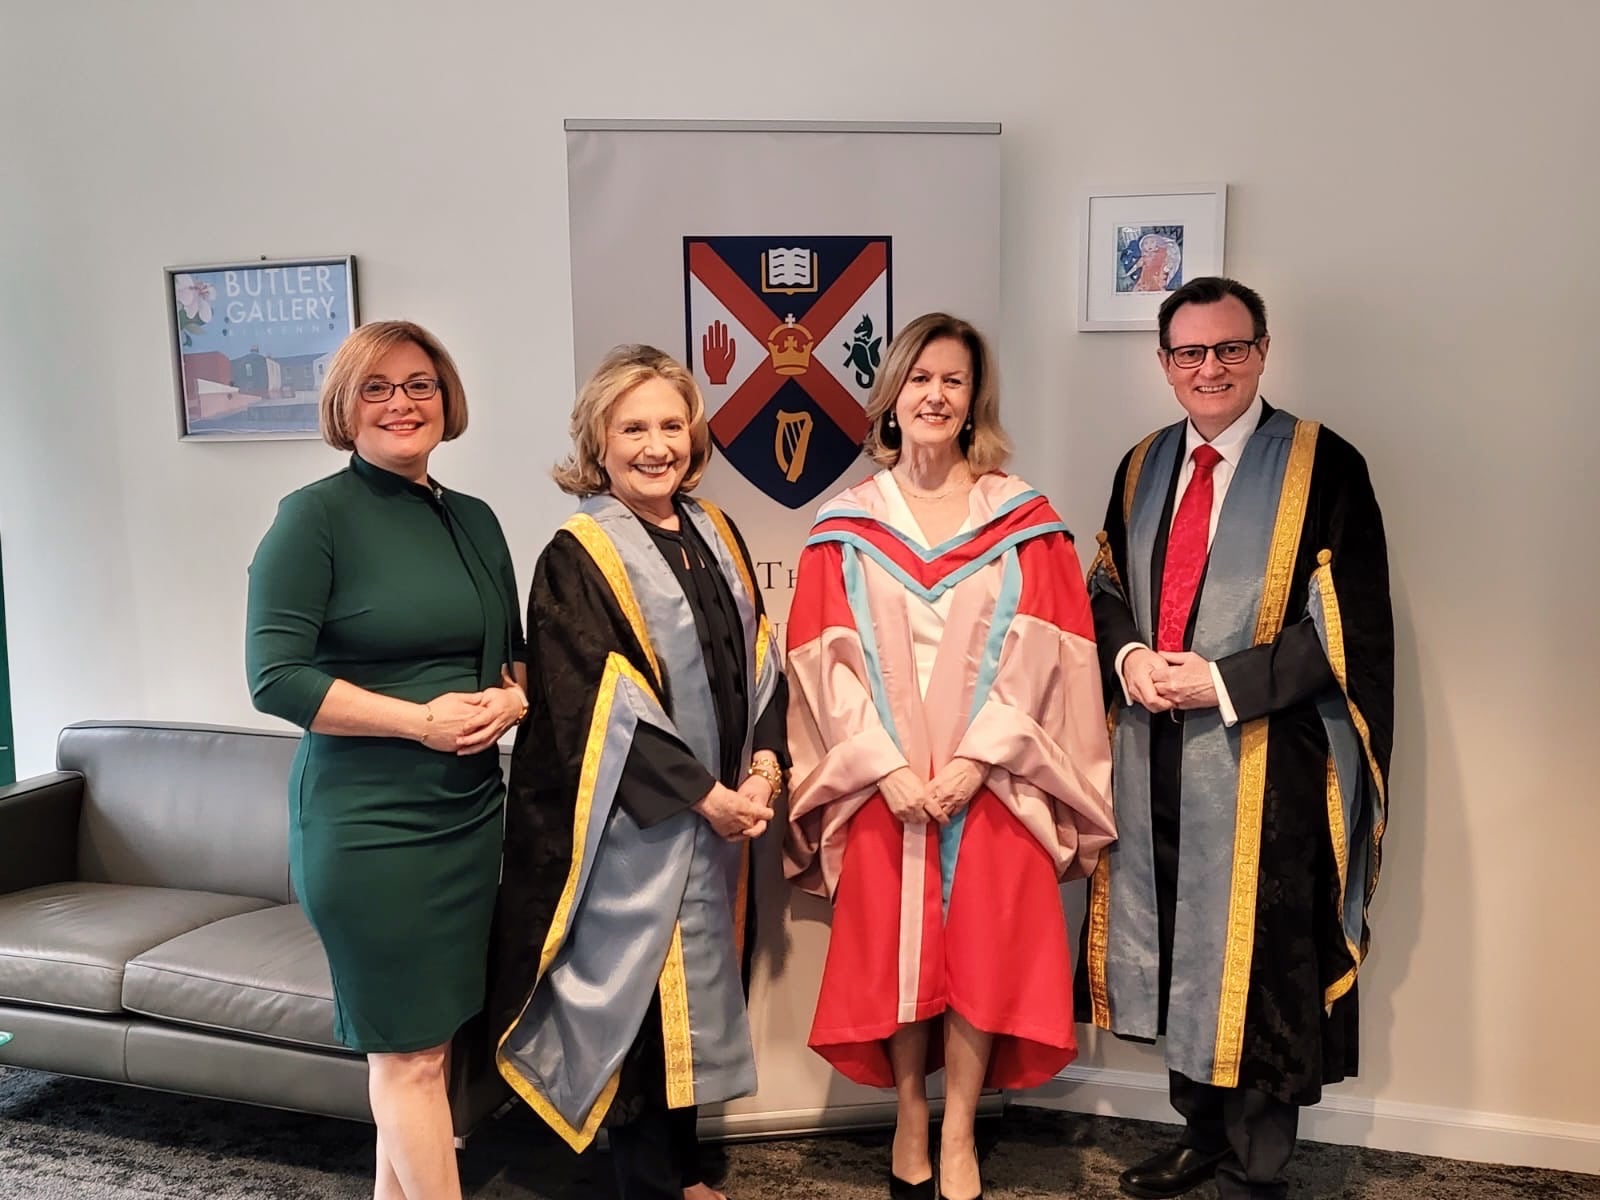 Anne Anderson honoured by Queen's University Chancellor Hillary Clinton at the Irish Consulate